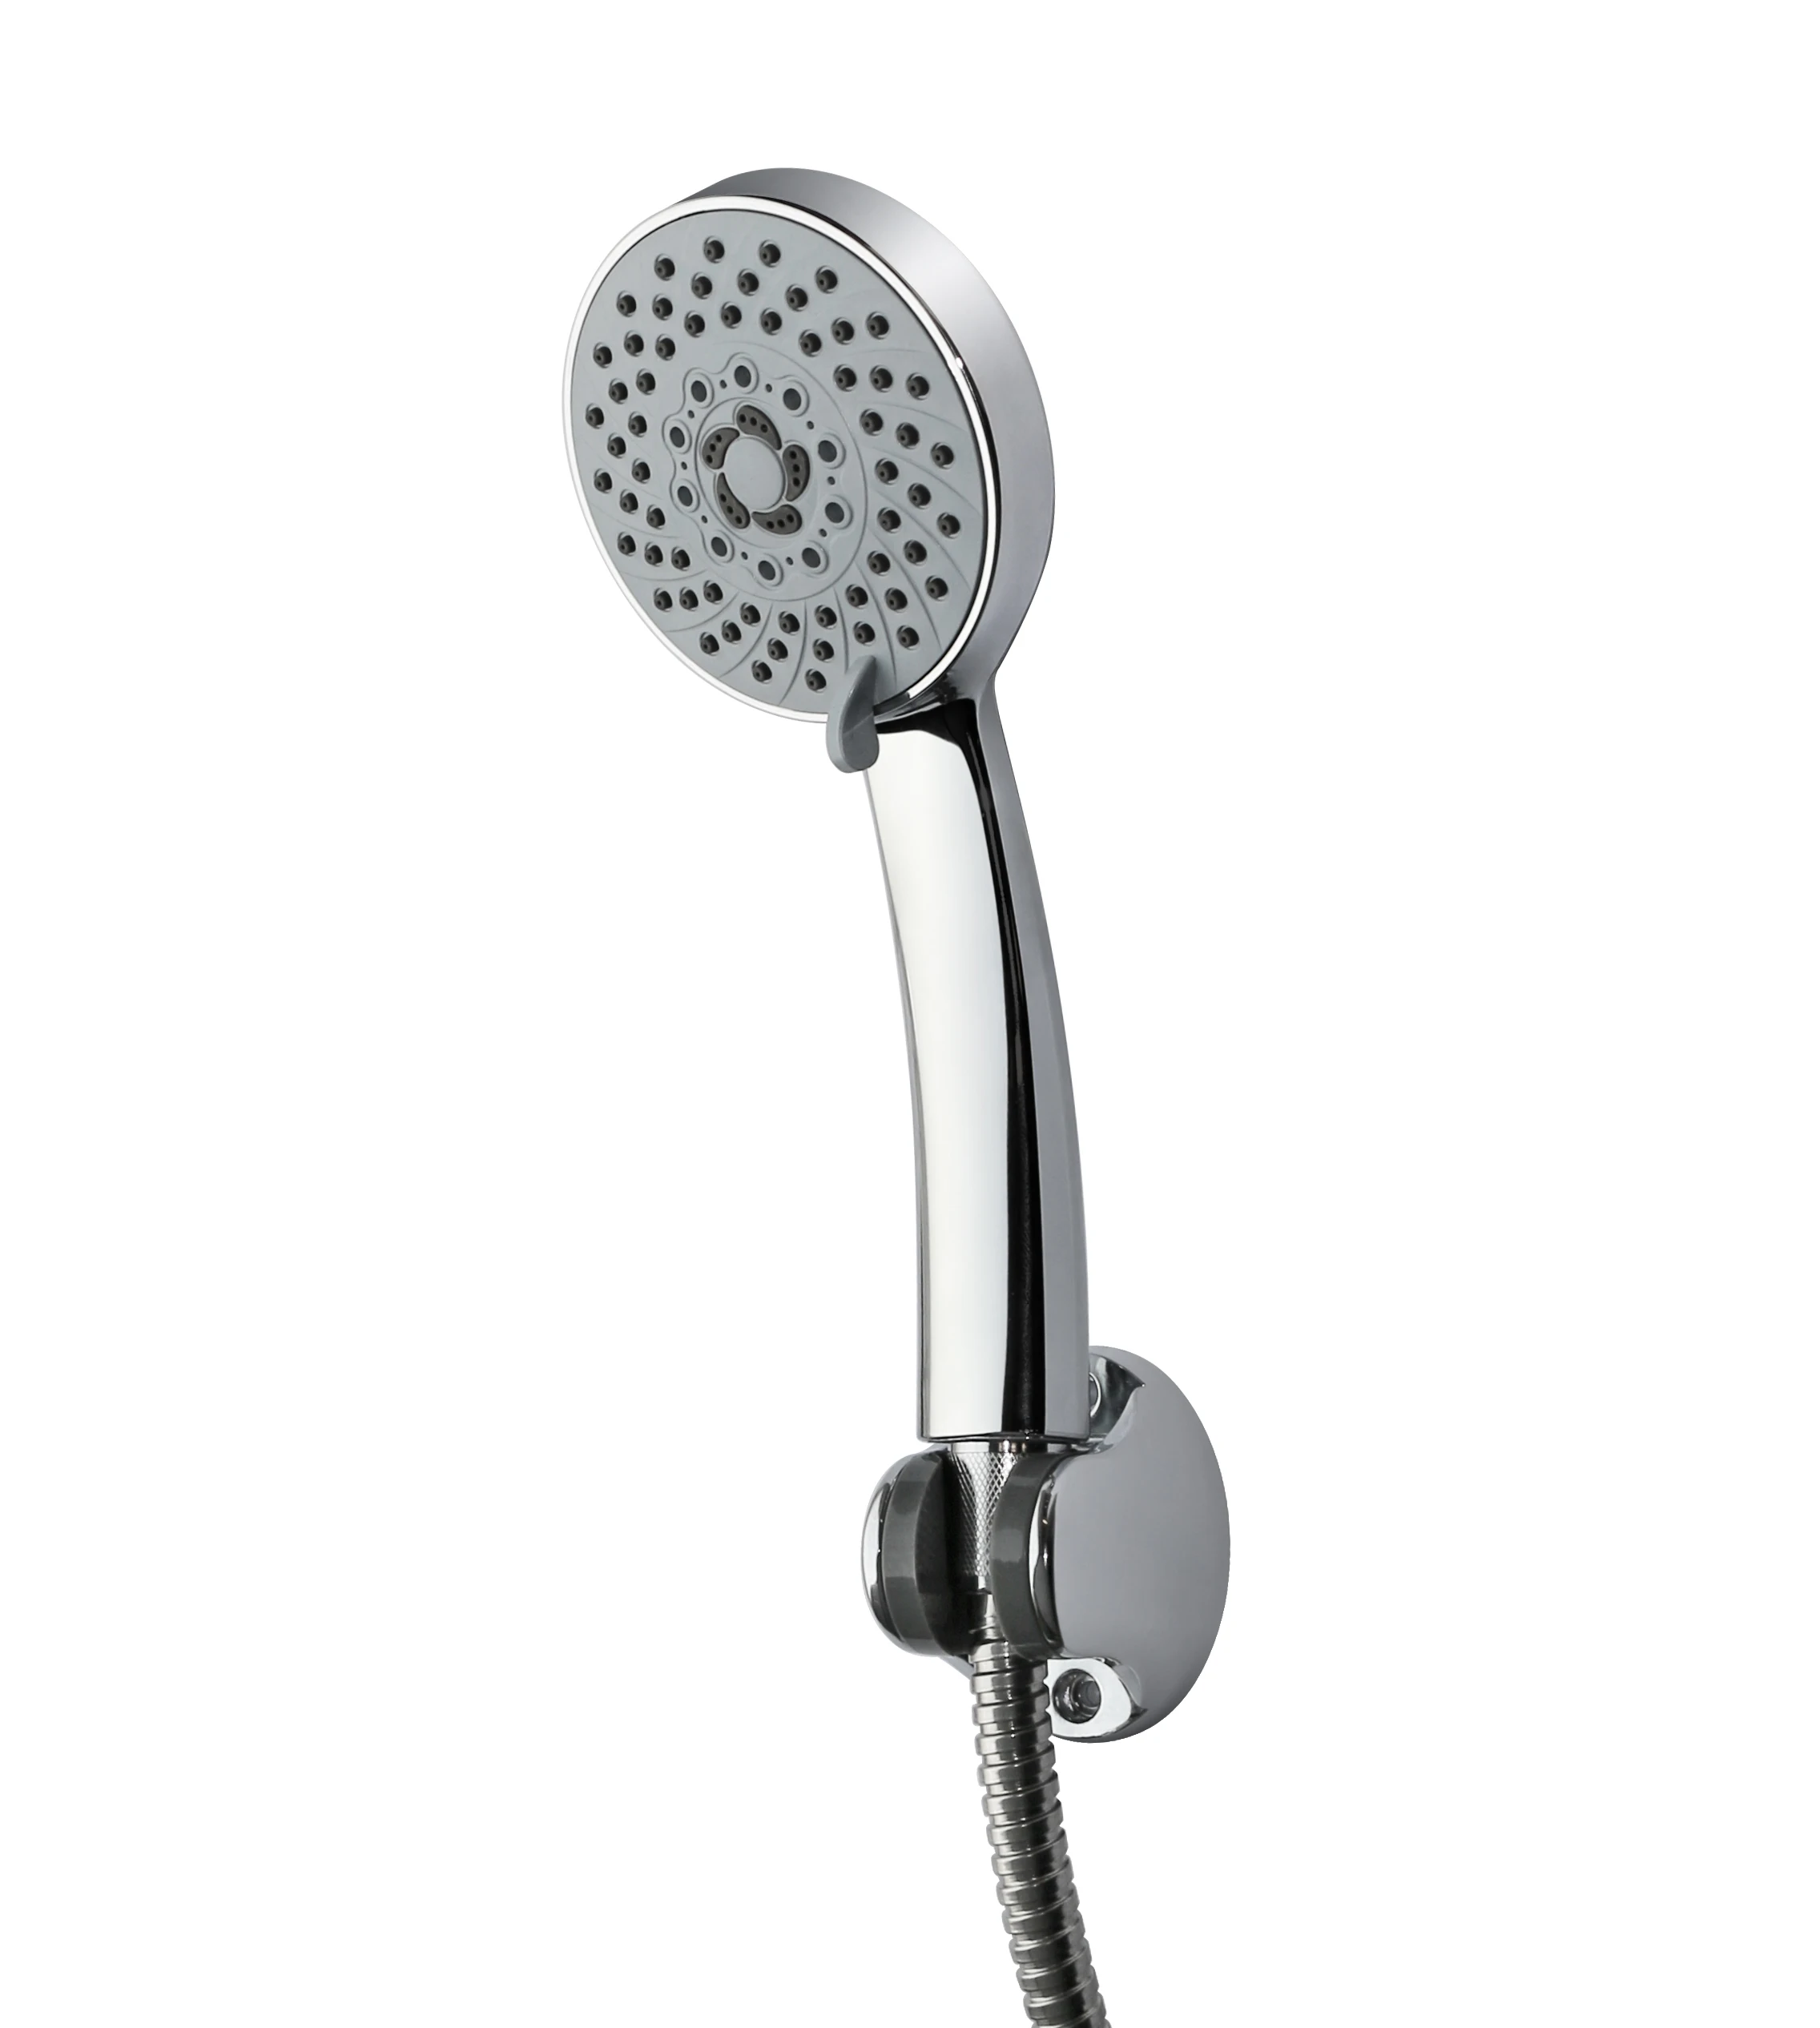 Europe design bathroom thermostatic shower mixer,hot and cold water mixer shower